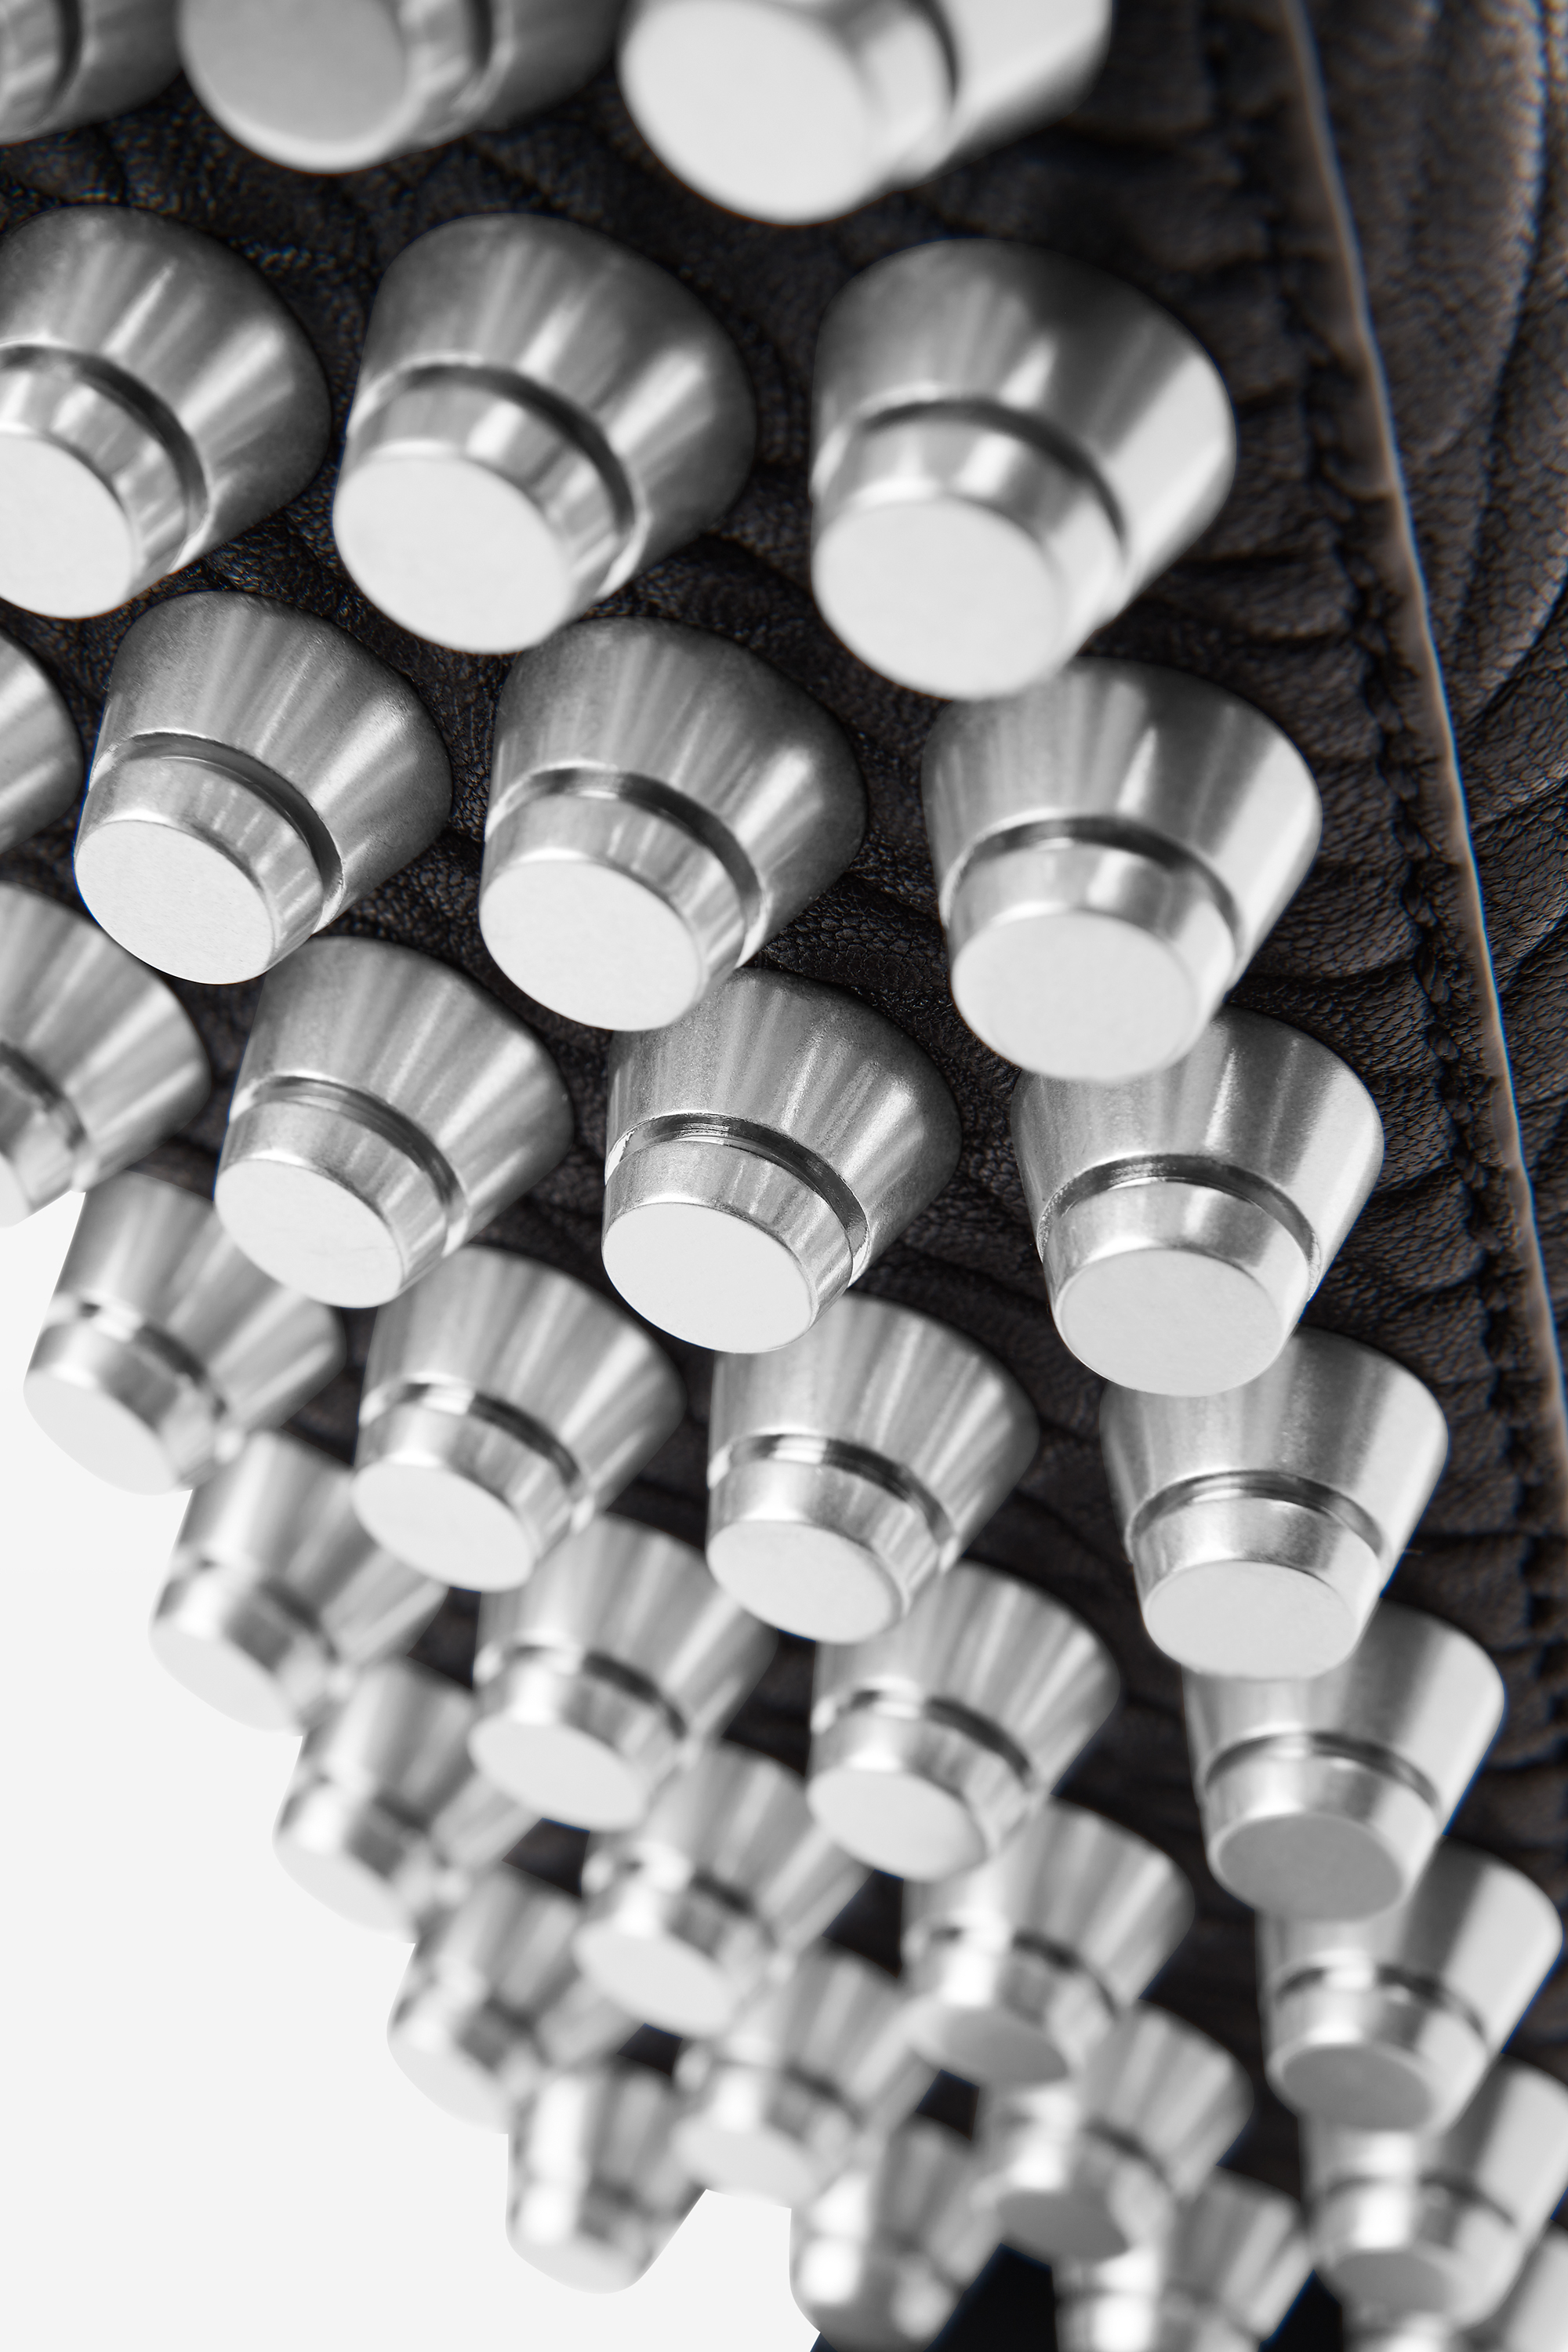 Close-up of a designer bag featuring numerous metallic studs arranged in uniform rows